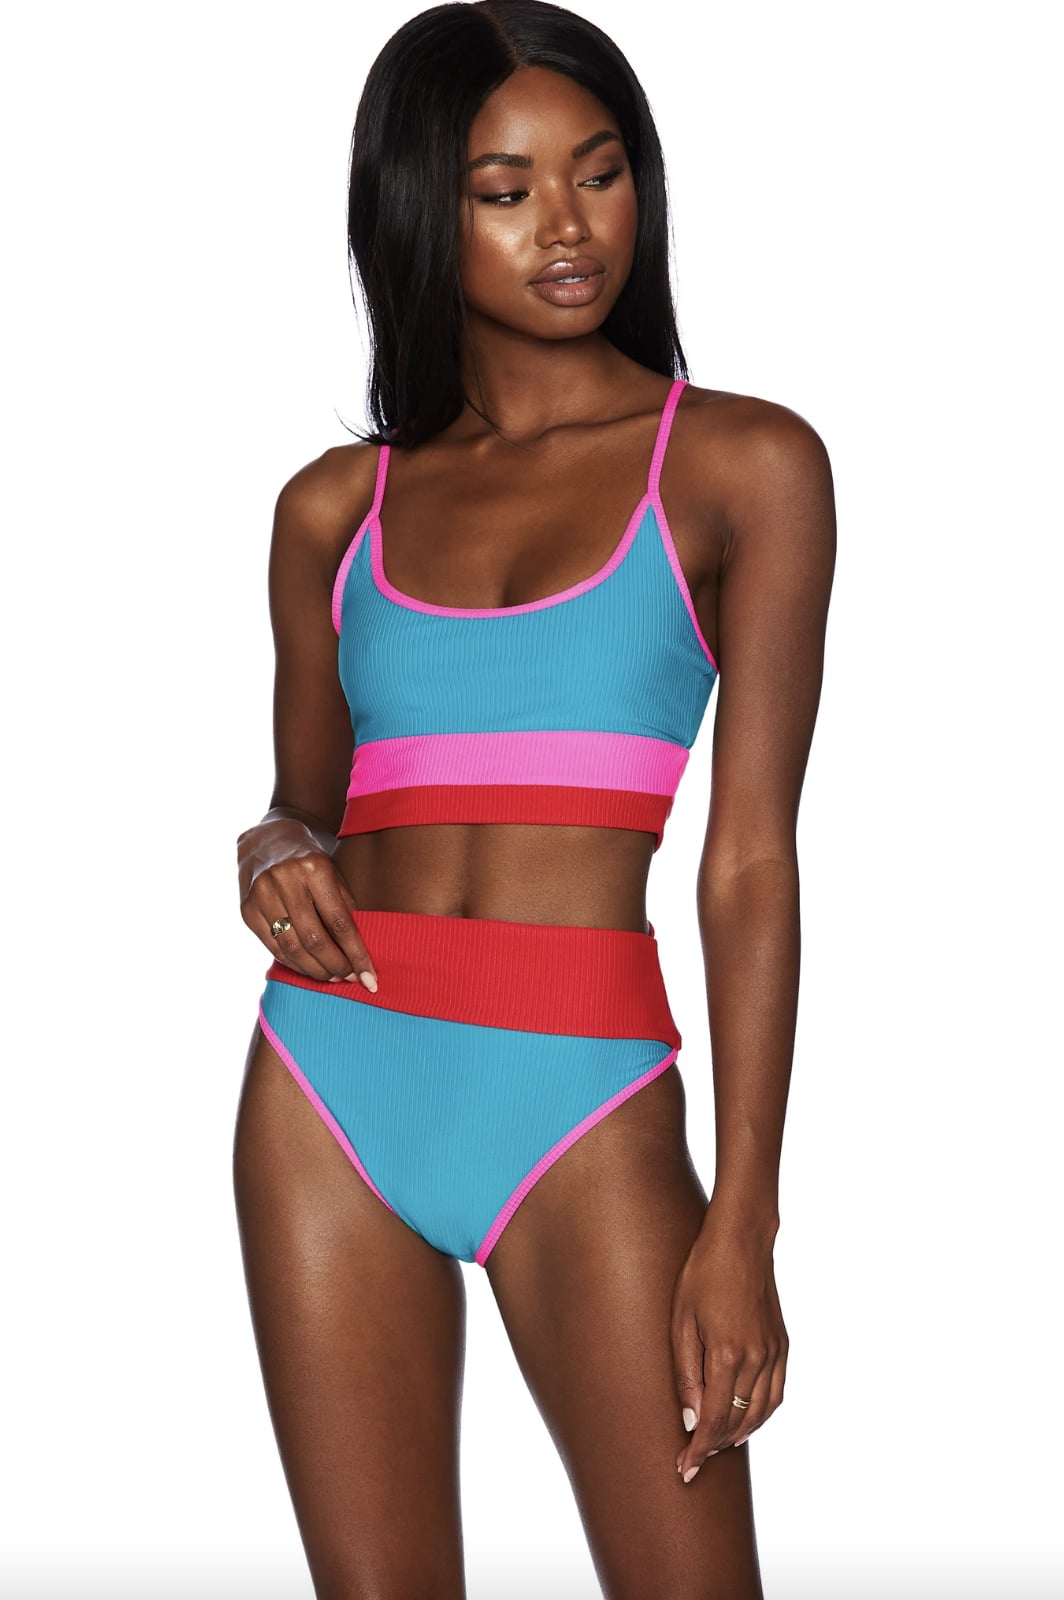 Bright Colored Swimwear We Can't Wait to Wear